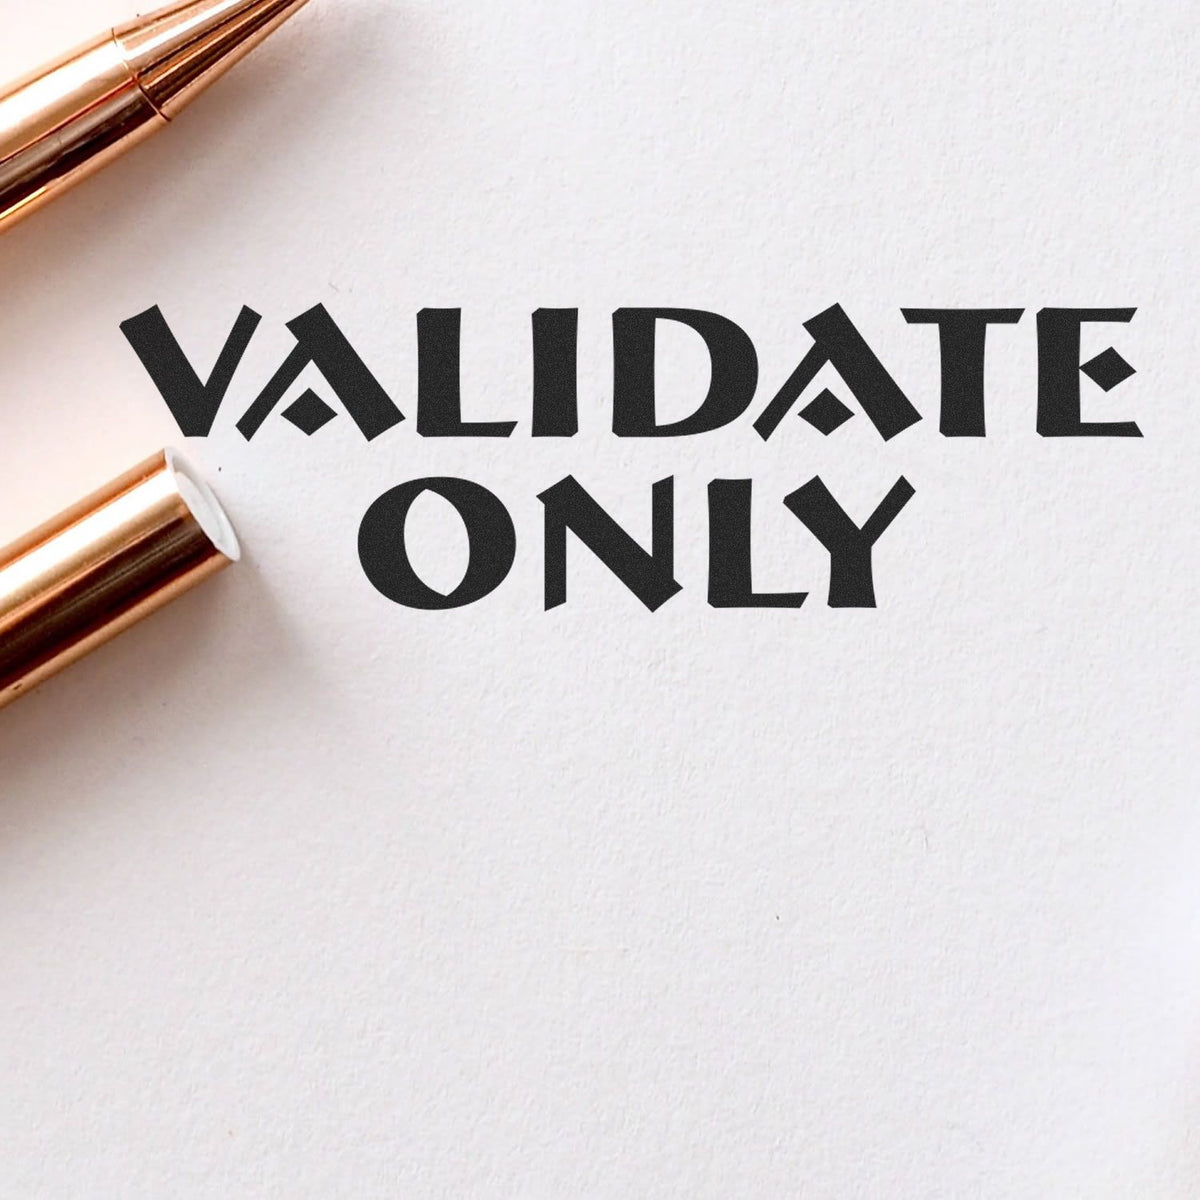 Validate Only Rubber Stamp Lifestyle Photo